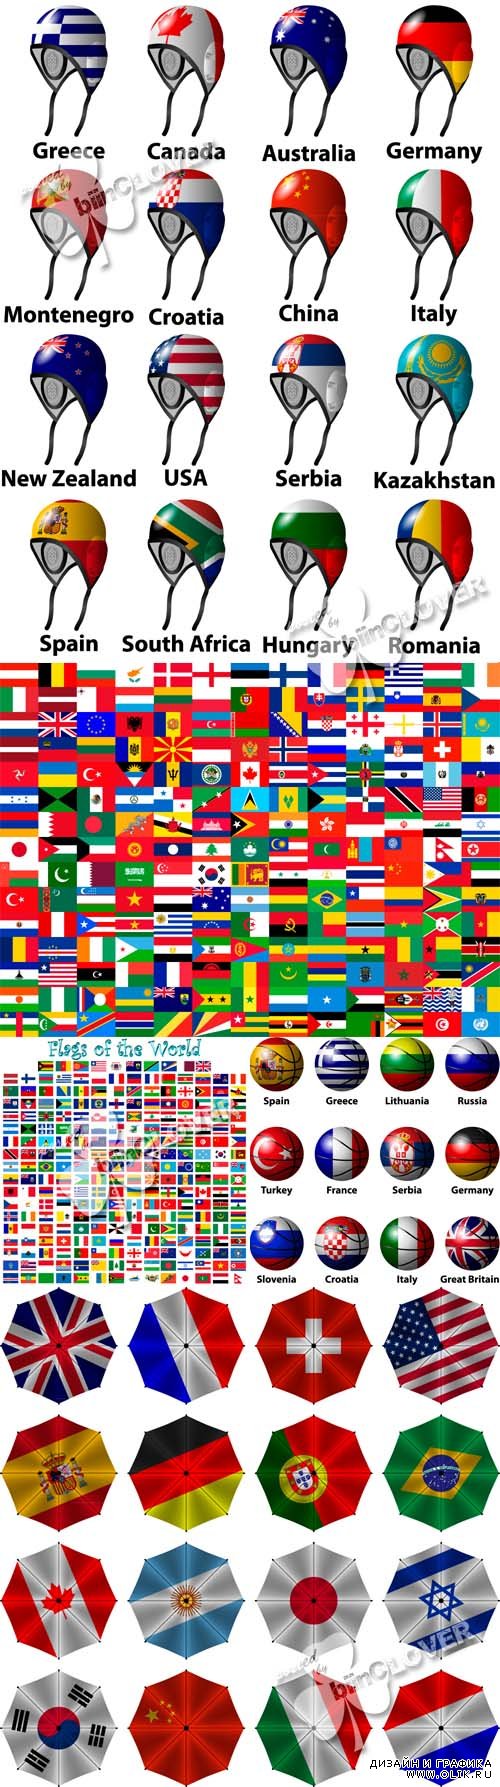 Flags of the world design 0457